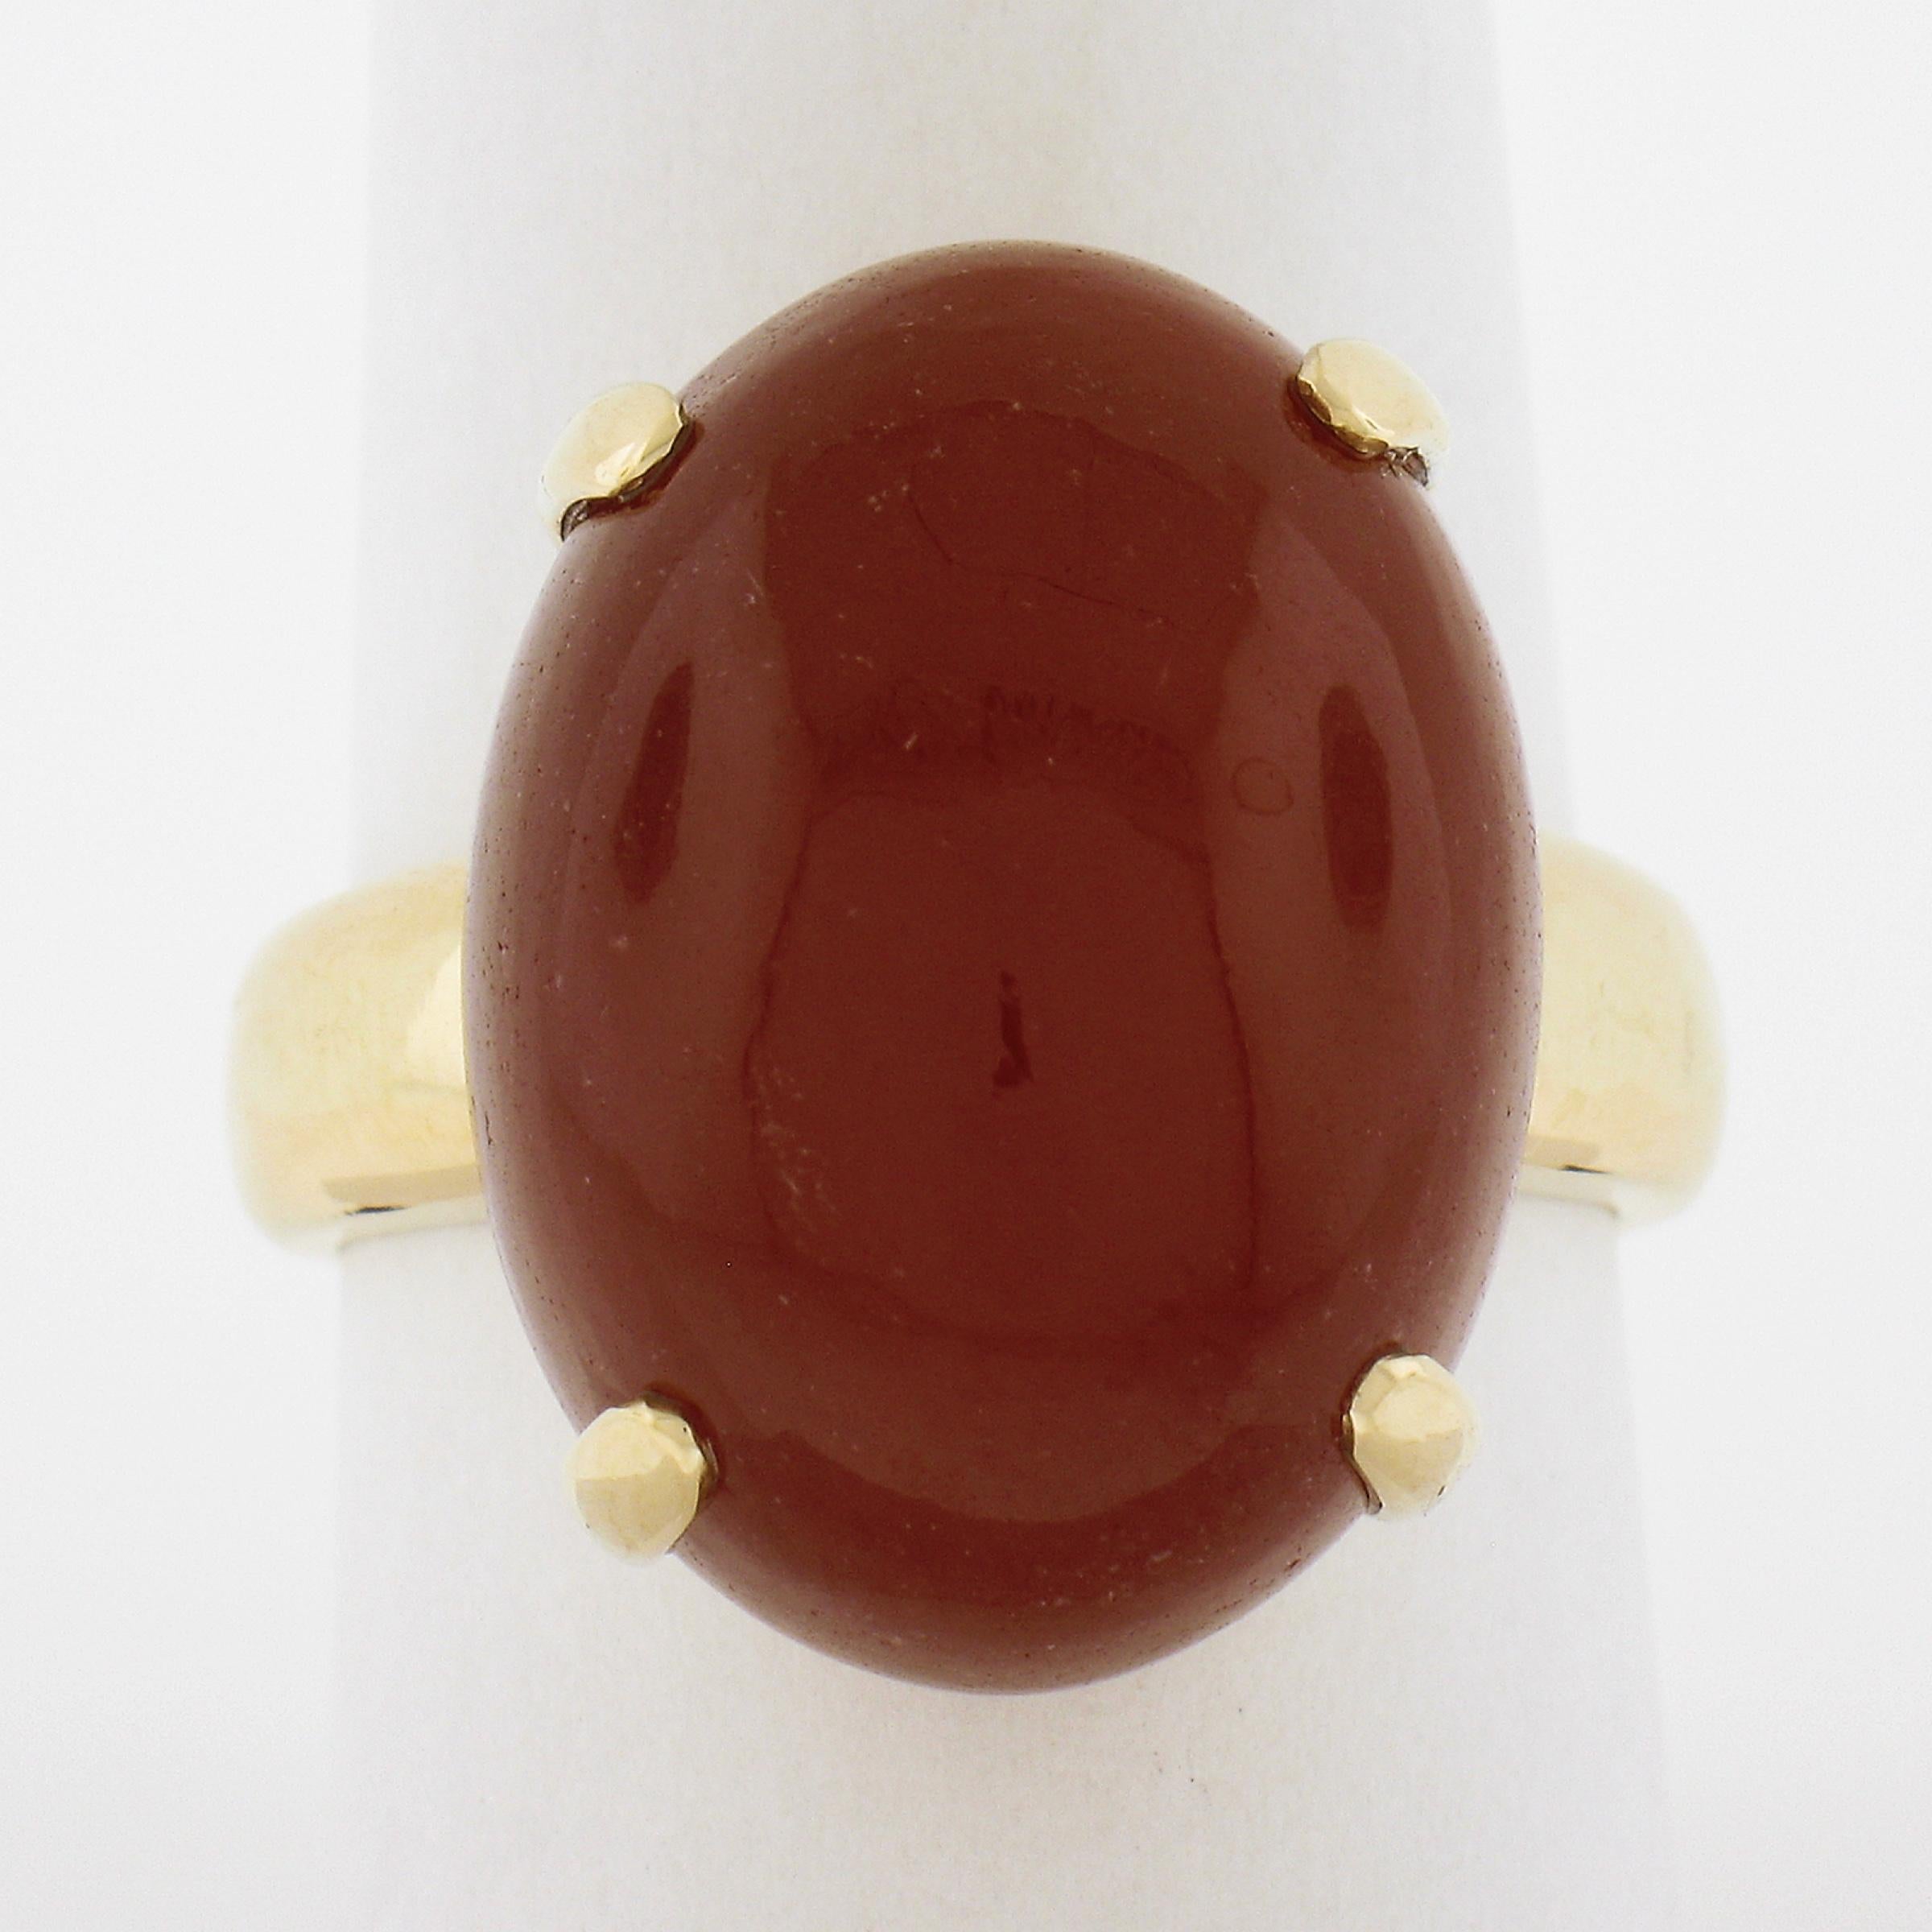 --Stone(s):--
(1) Natural Genuine Carnelian - Oval Cabochon Cut - Prong Set - Rich Reddish Orange Color - 20.5x15.2mm (approx.)

Material: 18K Solid Yellow Gold
Weight: 10.6 Grams
Ring Size: 9.5 (Fitted on a finger. We can custom size this ring -